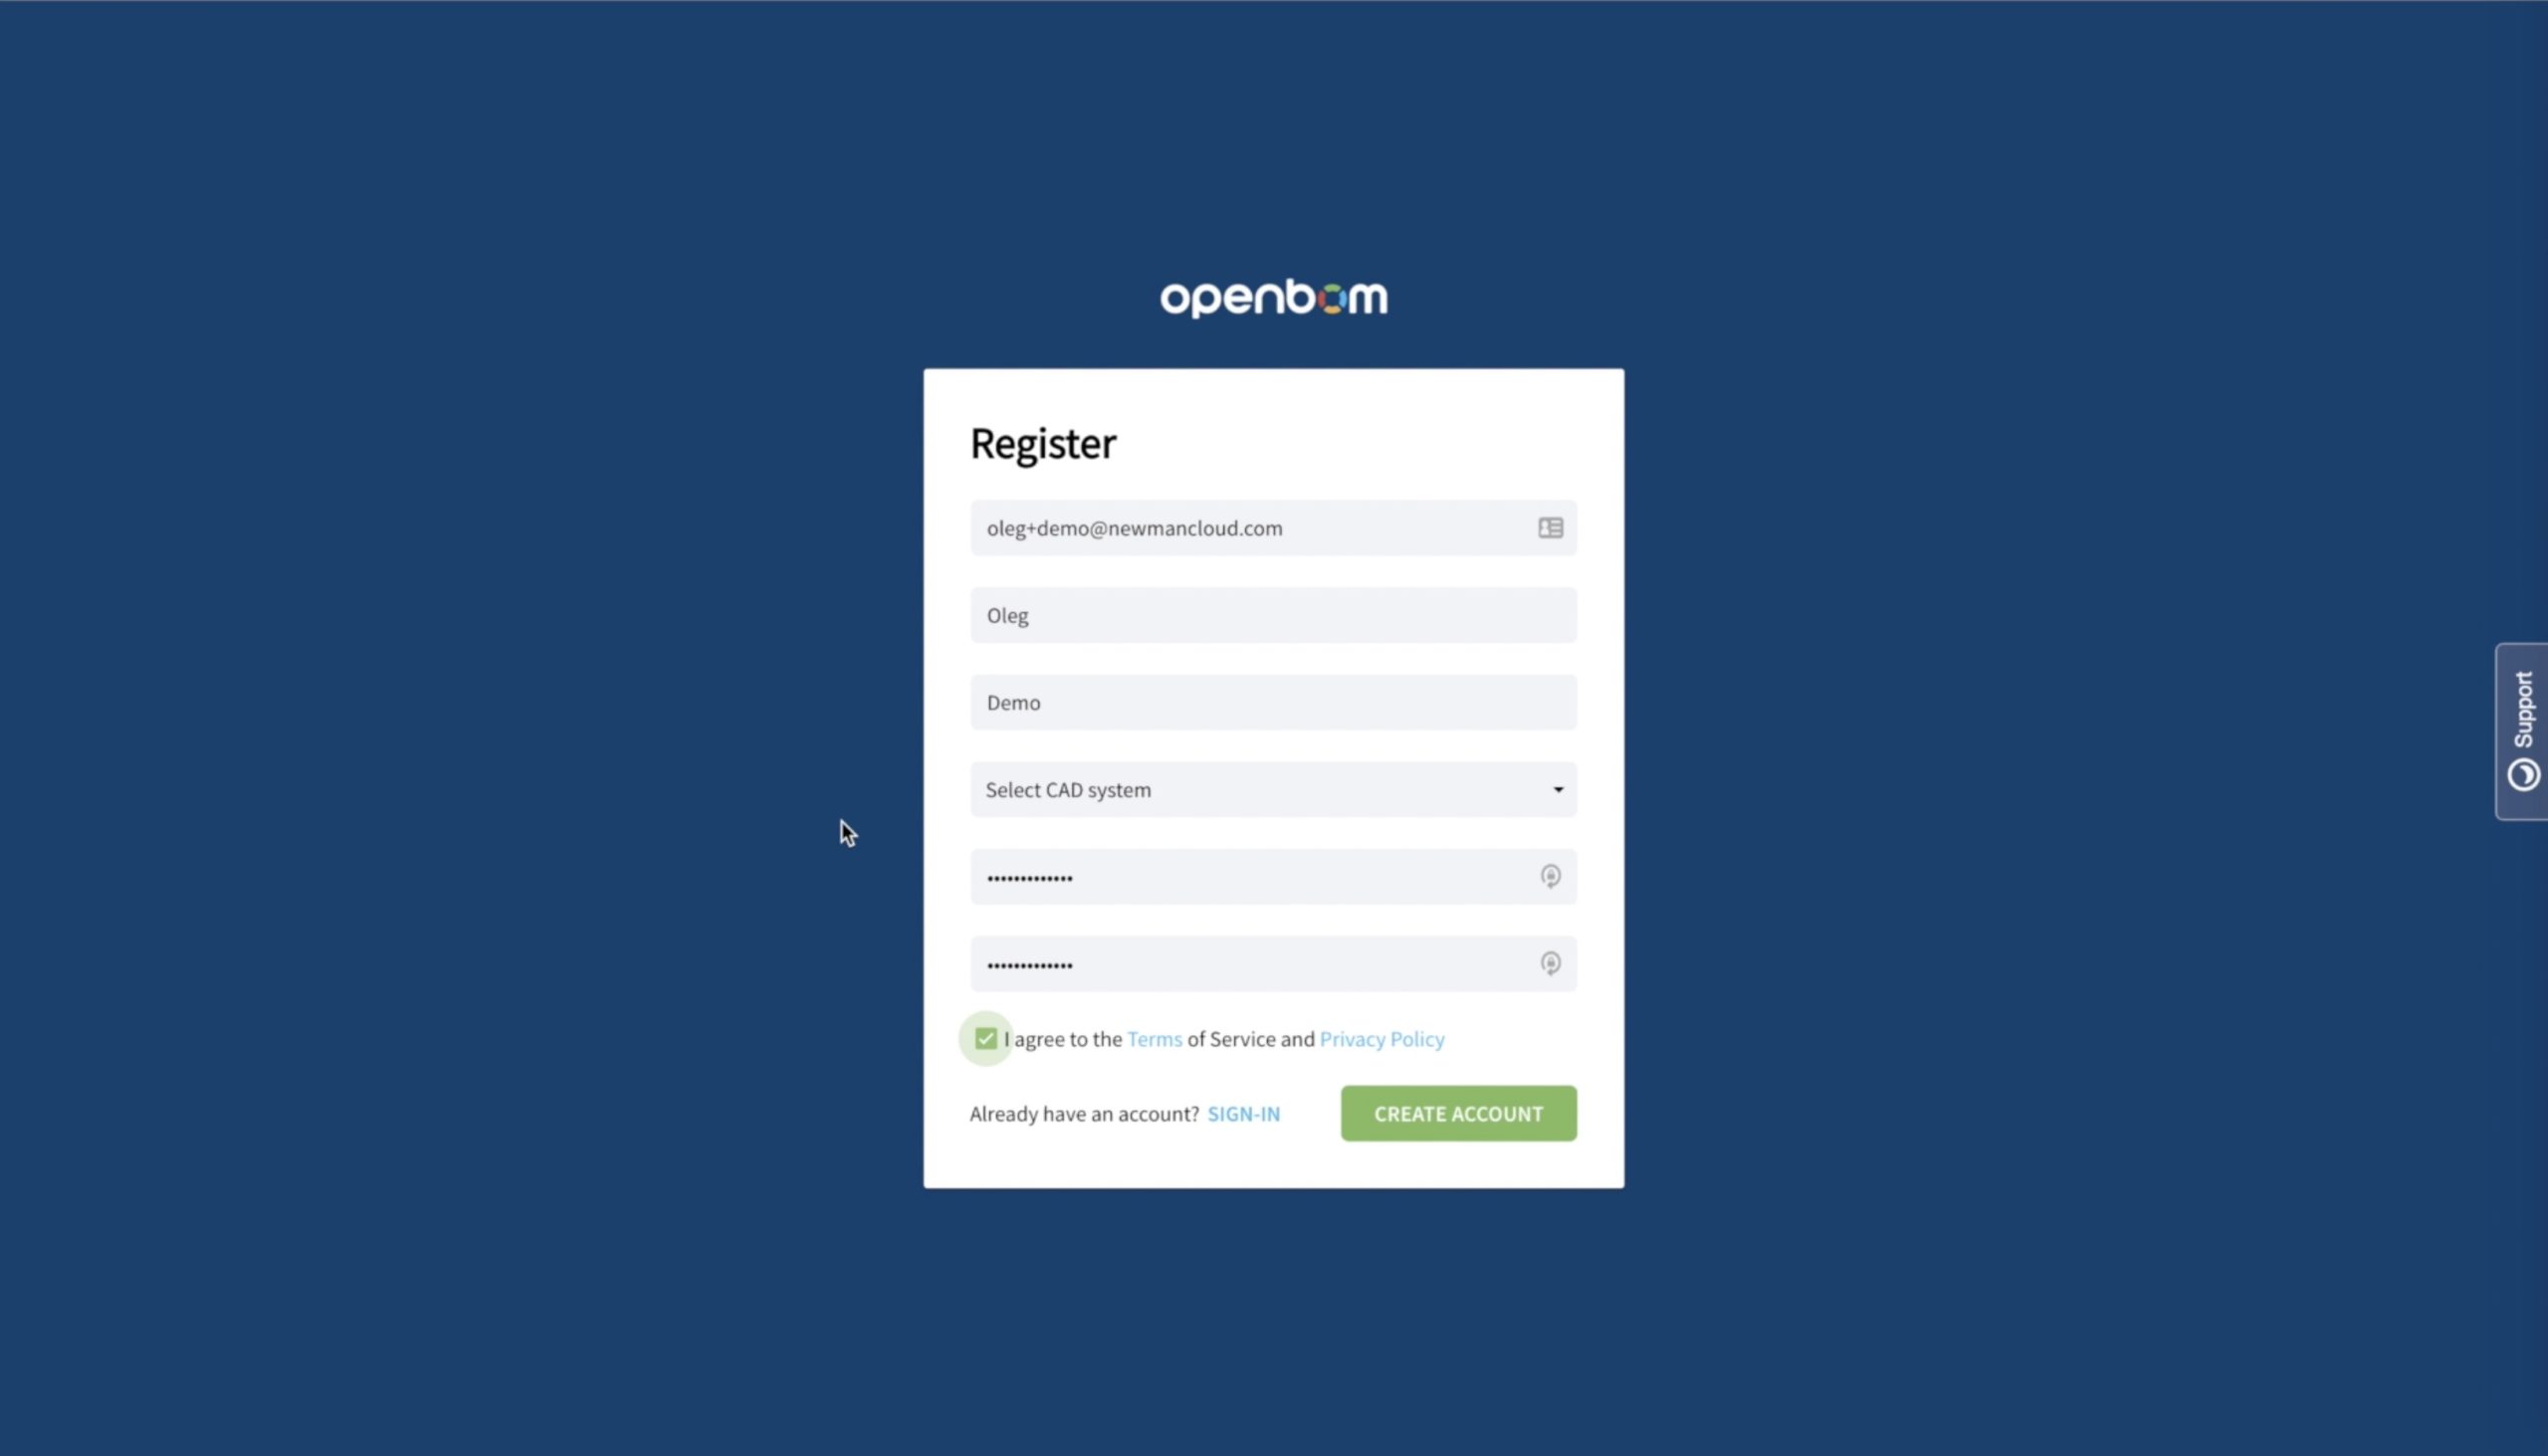 VIDEO: OpenBOM New Look and Feel